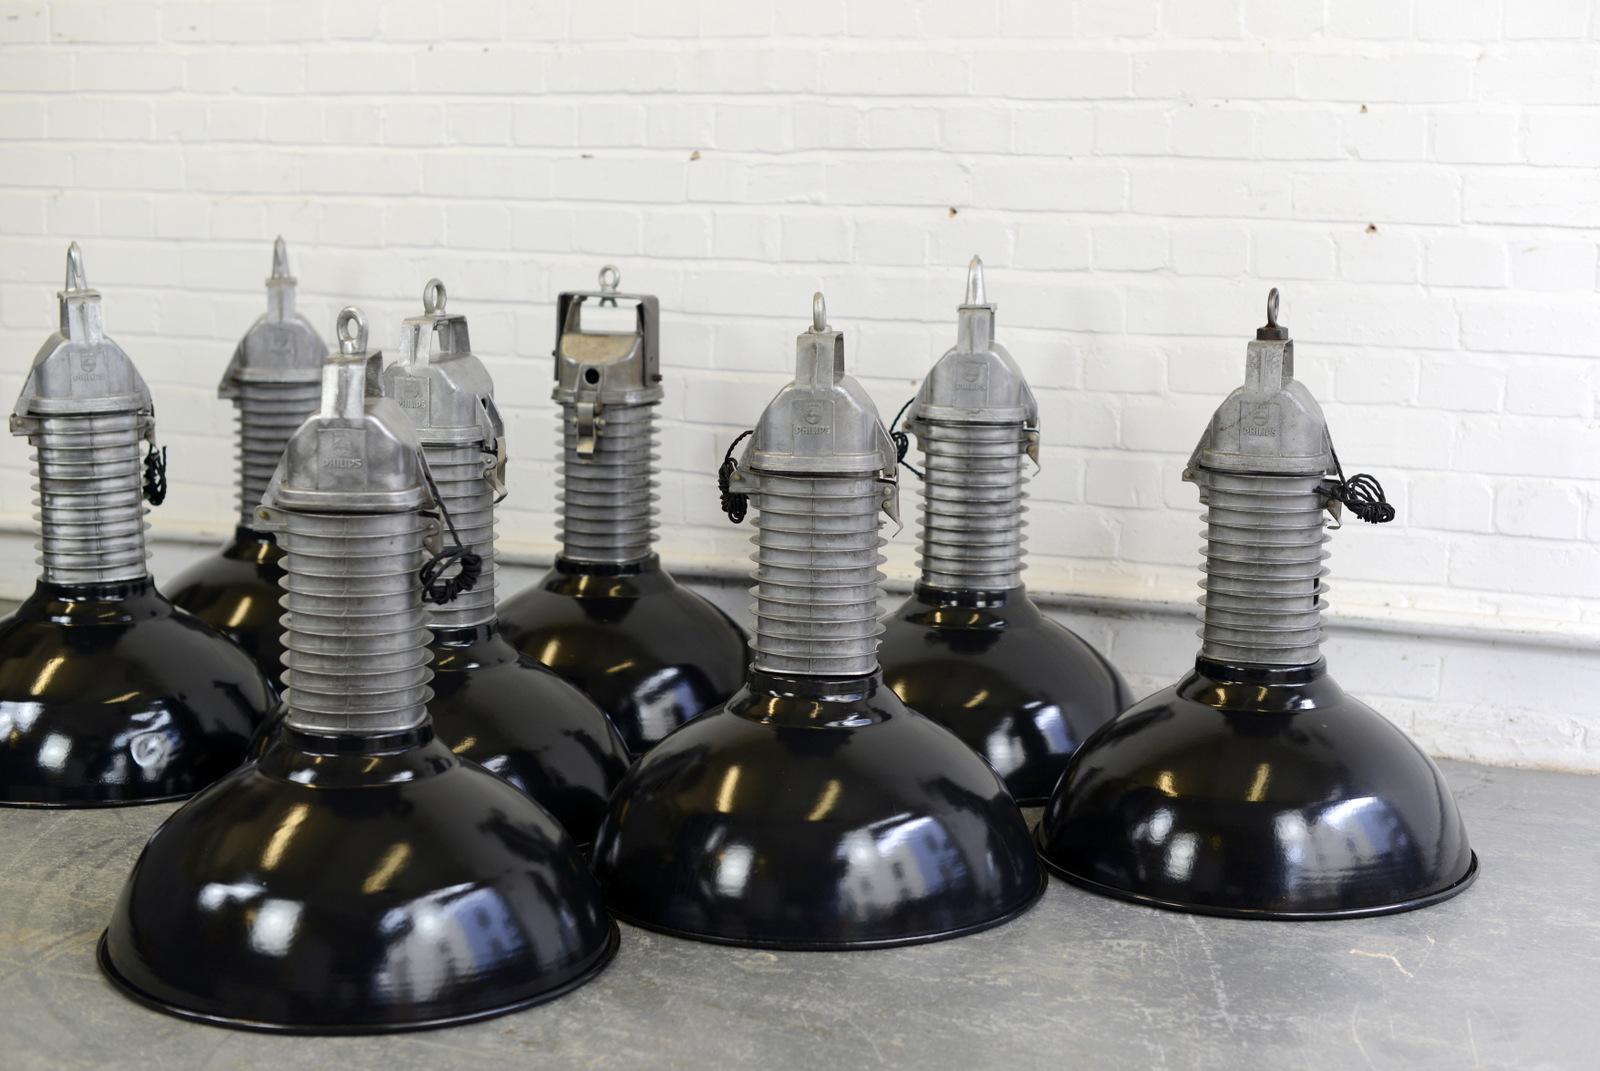 Large Dutch industrial lights by Phillips, circa 1950s.

- Price is per light
- Vitreous black enamel shades
- Cast aluminium finned tops
- Takes E27 fitting bulbs
- Comes with 100cm of black twist cable
- Comes with 100cm of suspension chain